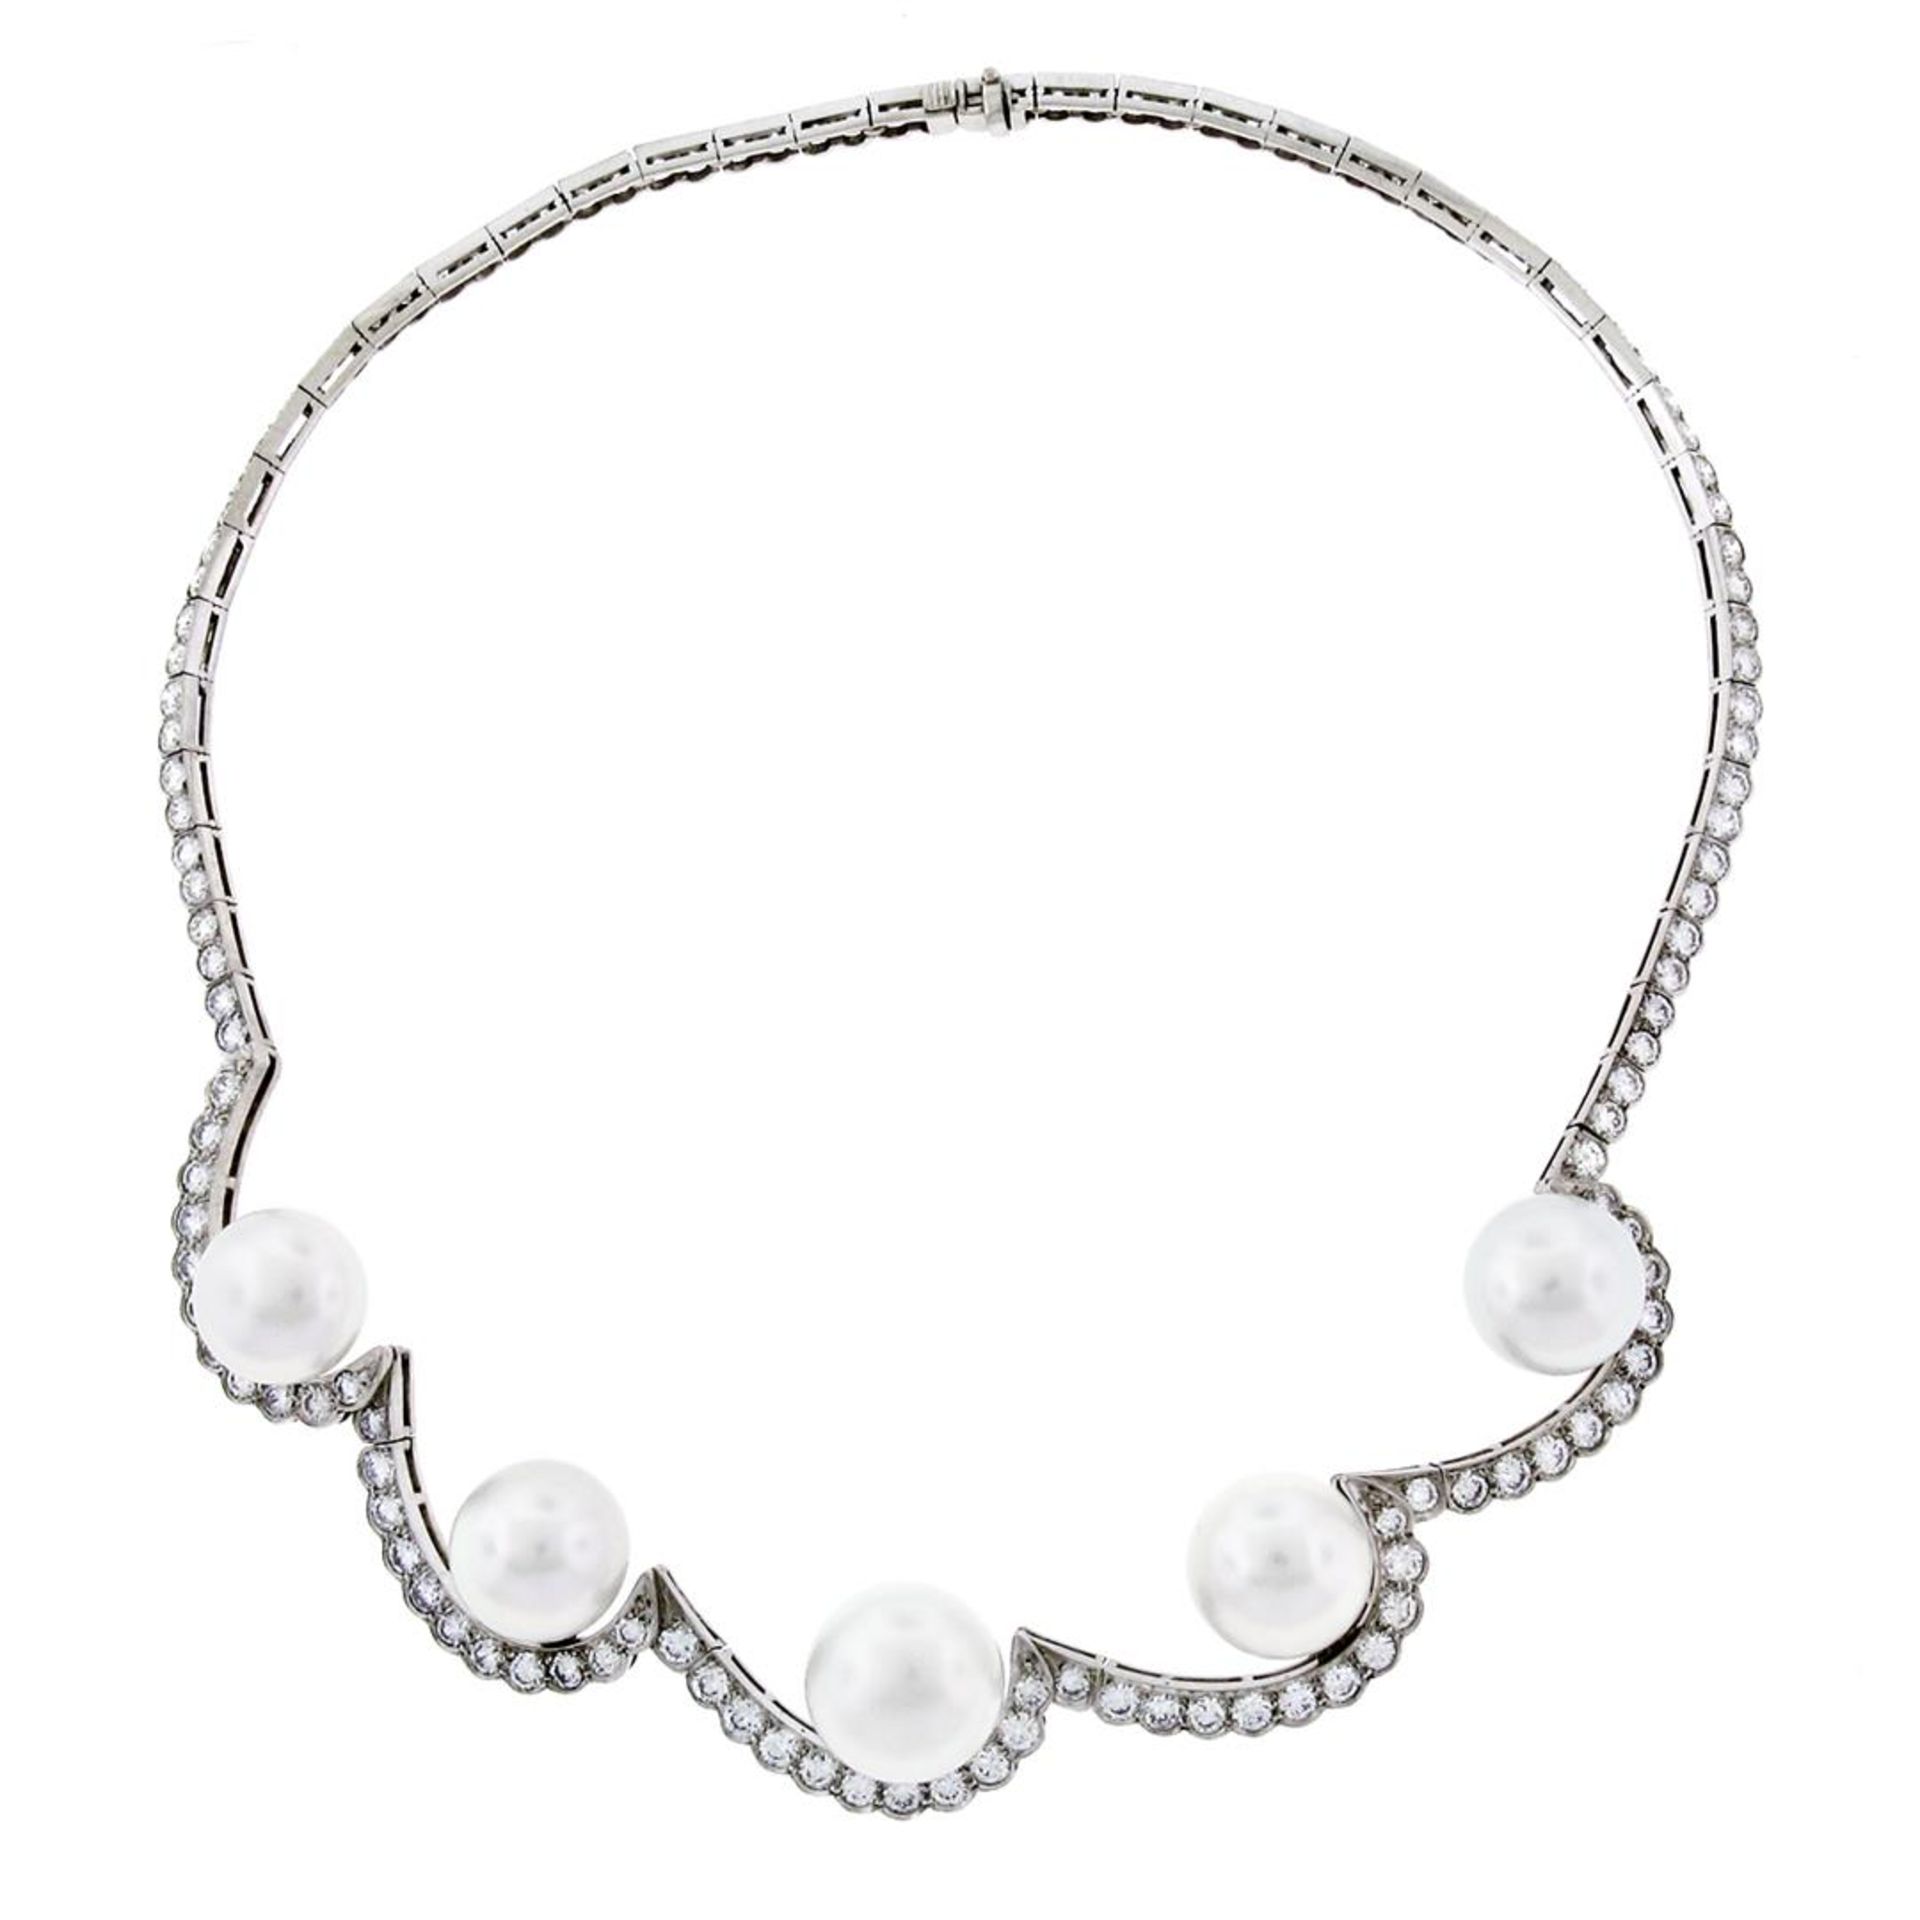 Platinum 10.25ctw Diamond & Floating South Sea Pearl Statement Necklace - Image 5 of 9